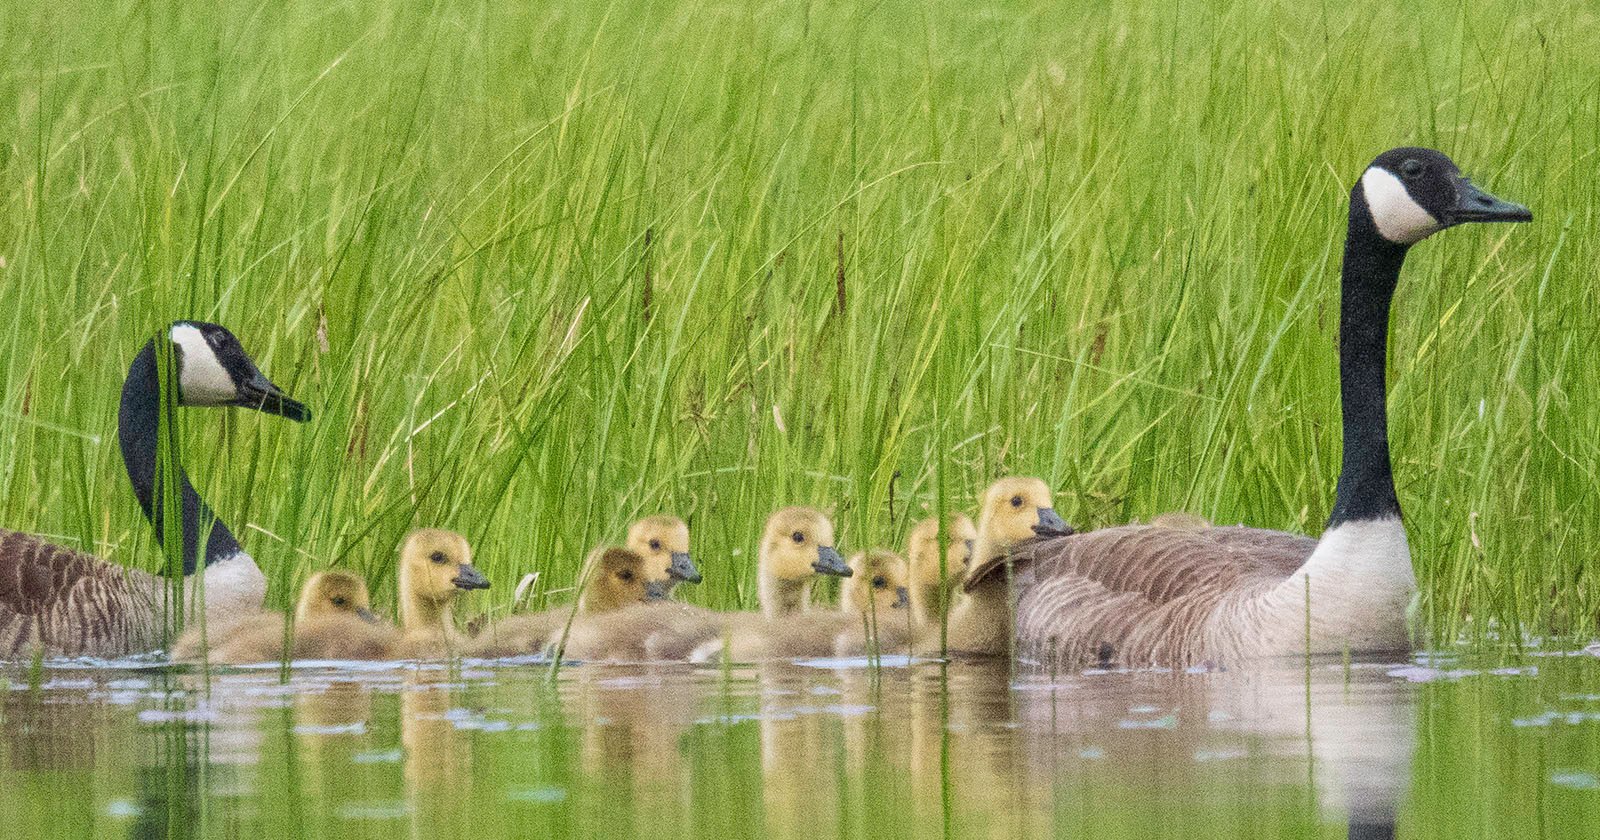 Wildlife on a Maine Pond: Micro Four Thirds Makes Photographing Baby Birds Safer and Easier